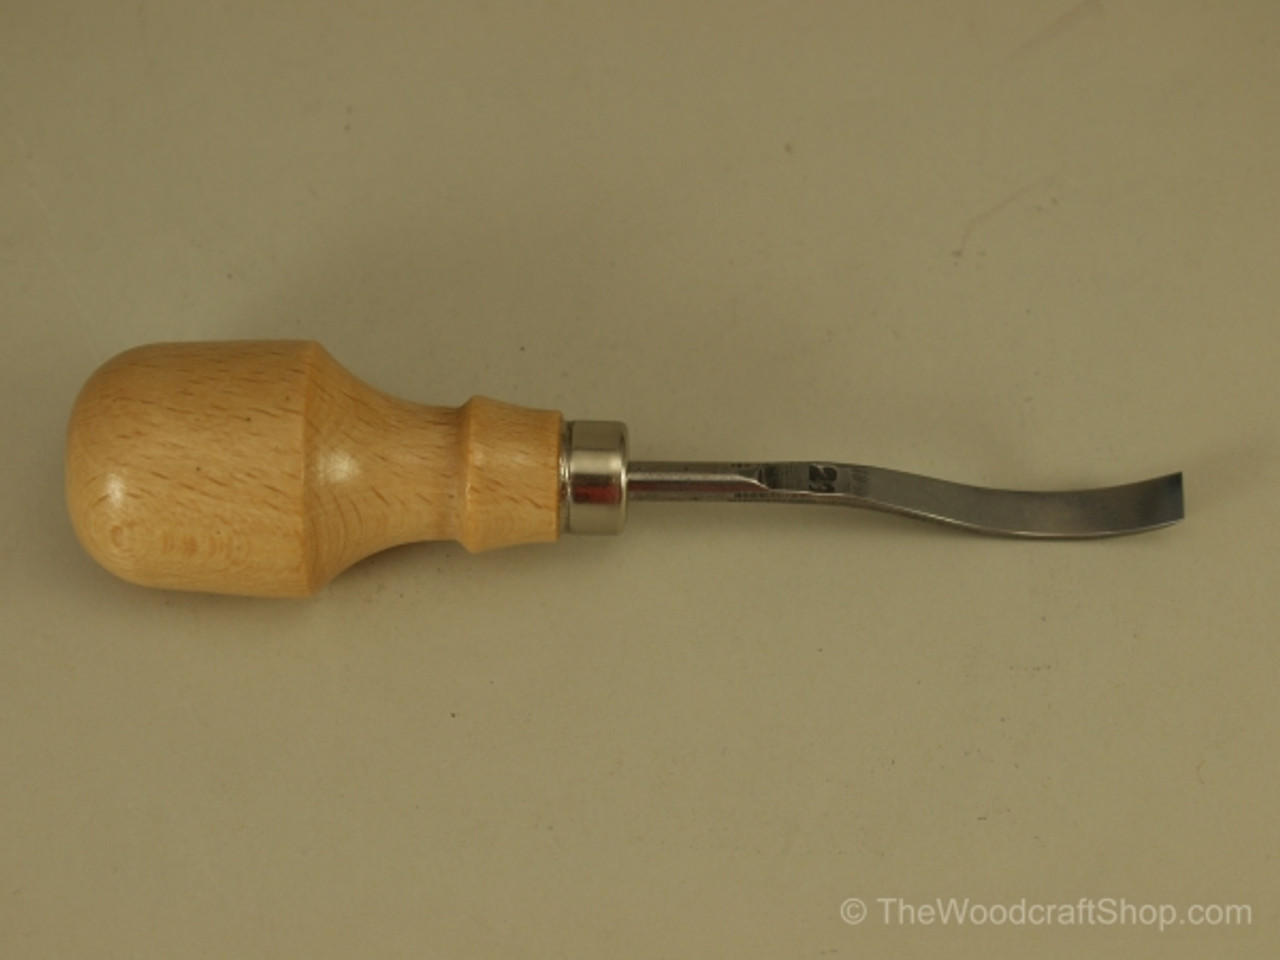 The image of the Stubai Palm #1 Short Bent Chisel 7mm is showing the beechwood handle and the blade.